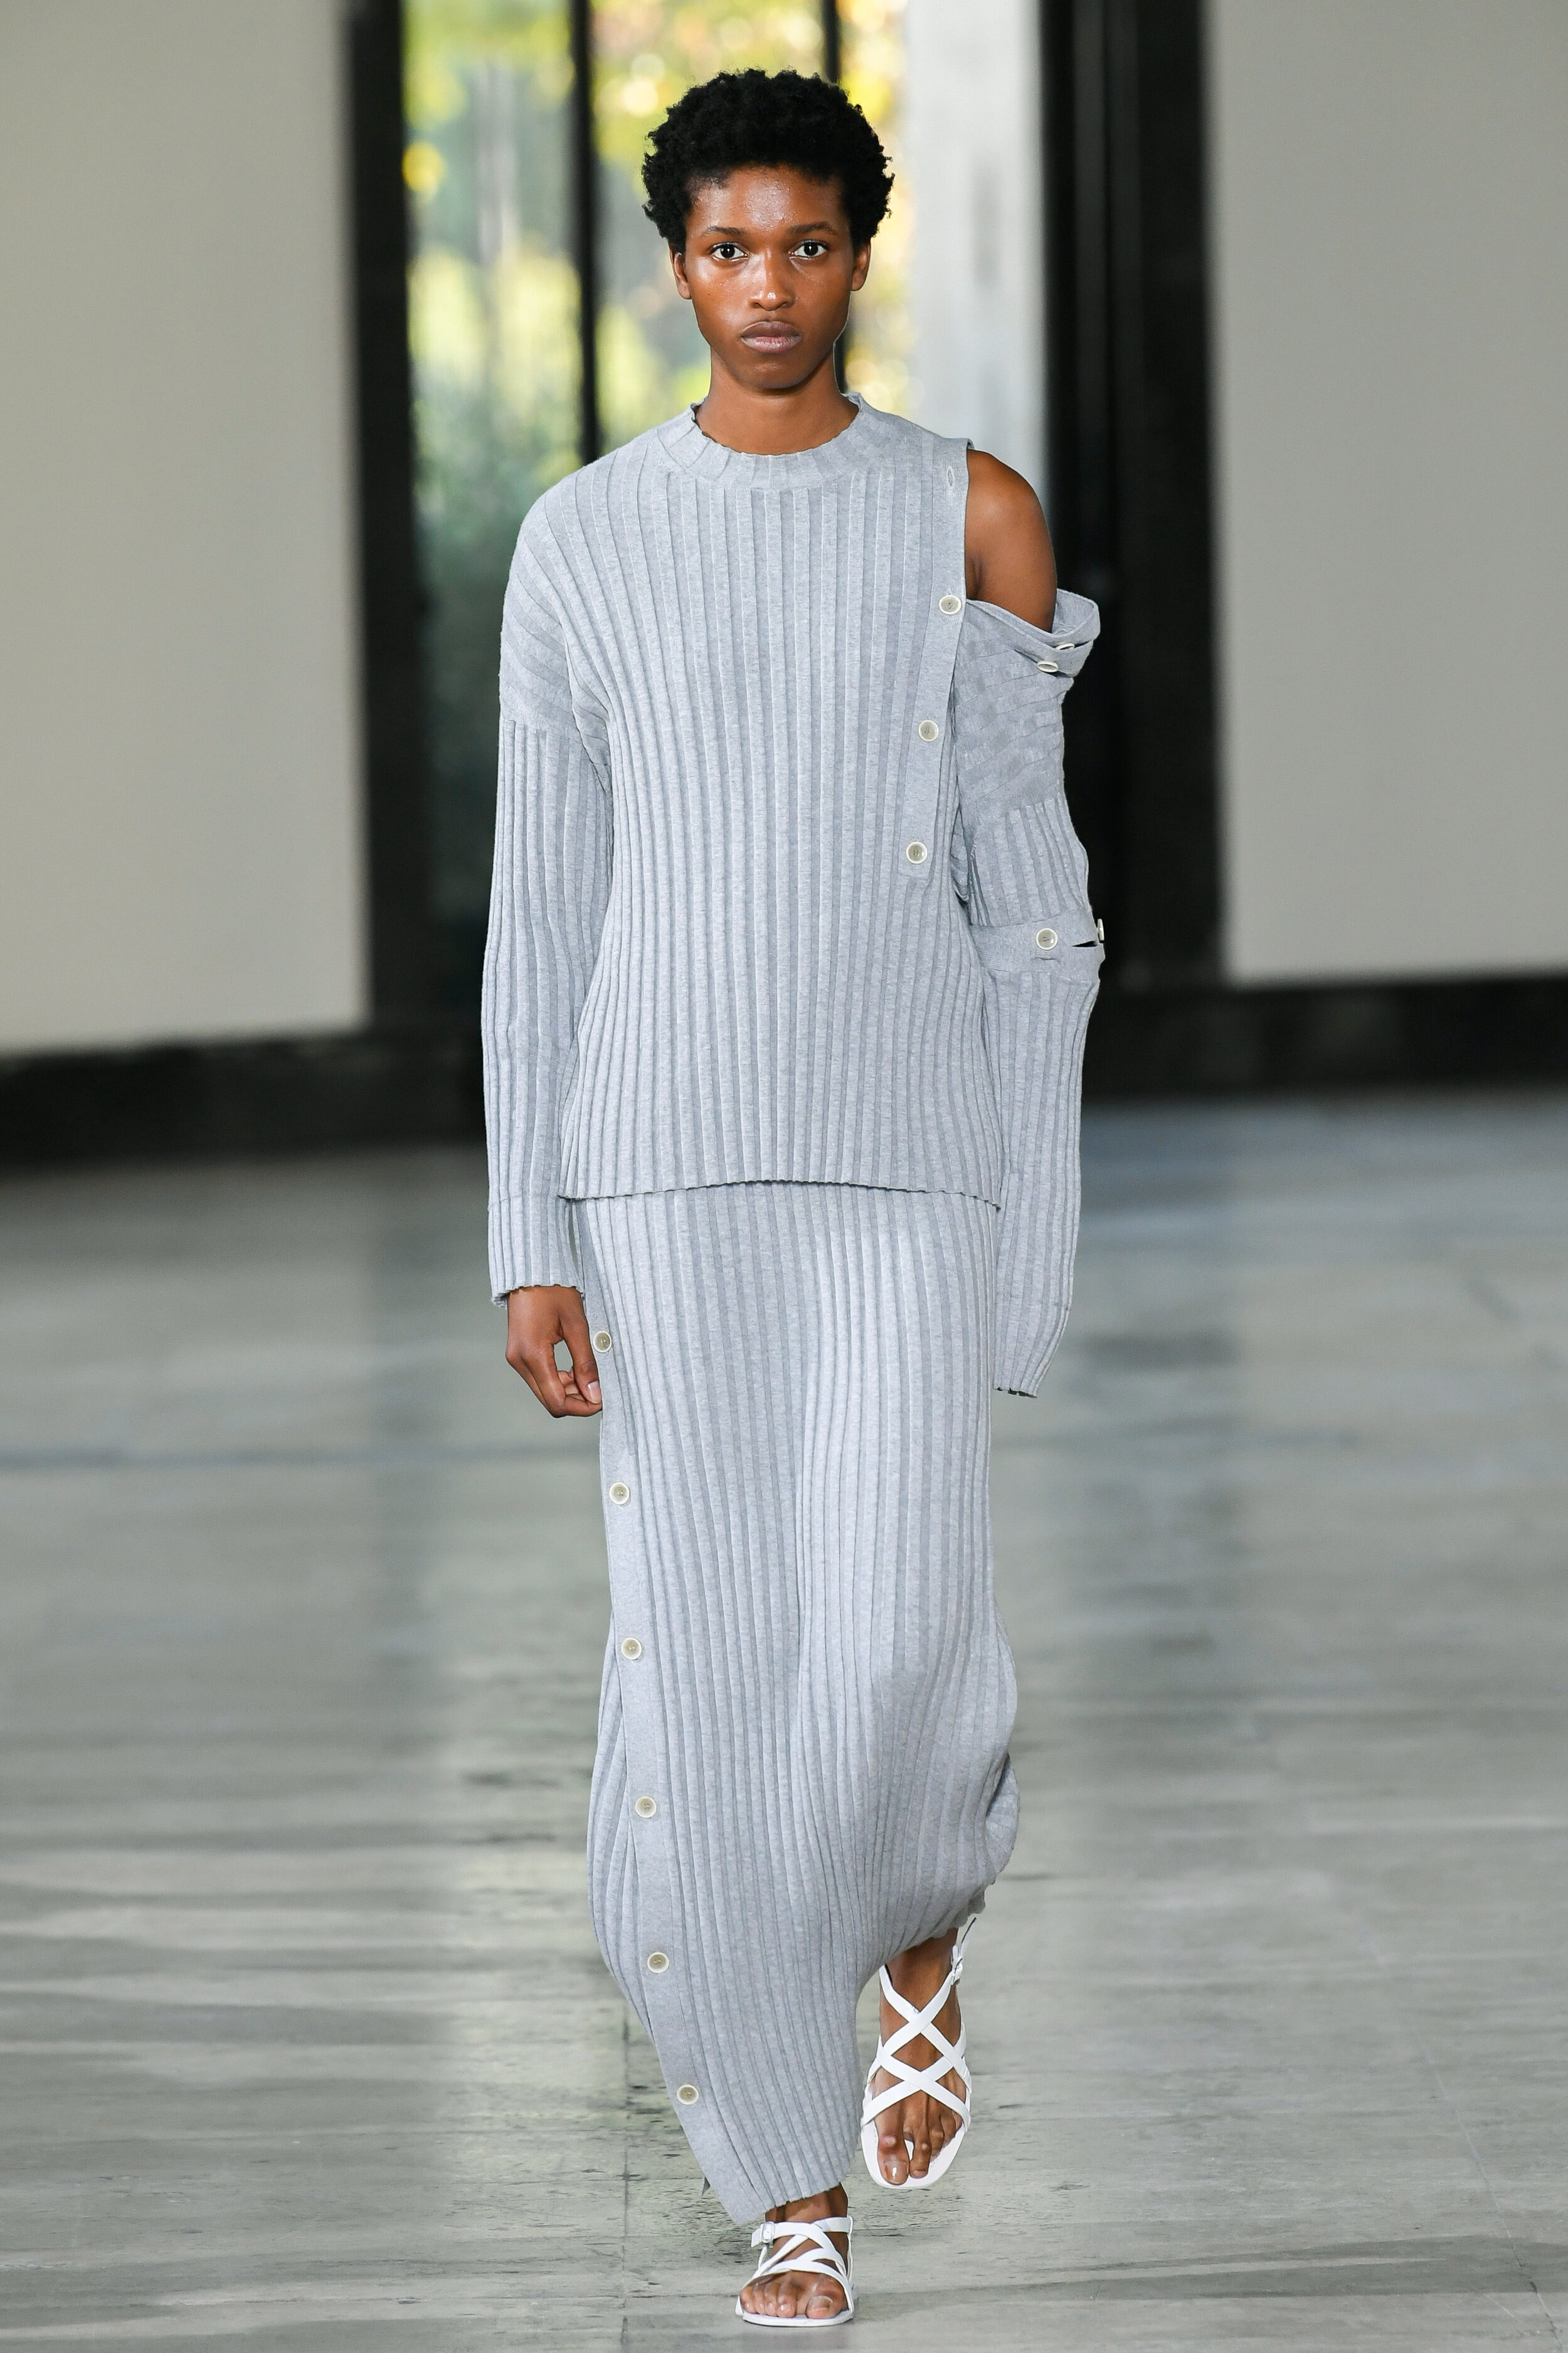  Model wears an outfit , as part of the women ready-to-wear summer 2020, women fashion week, Milan, Ita, from the house of Dawei 